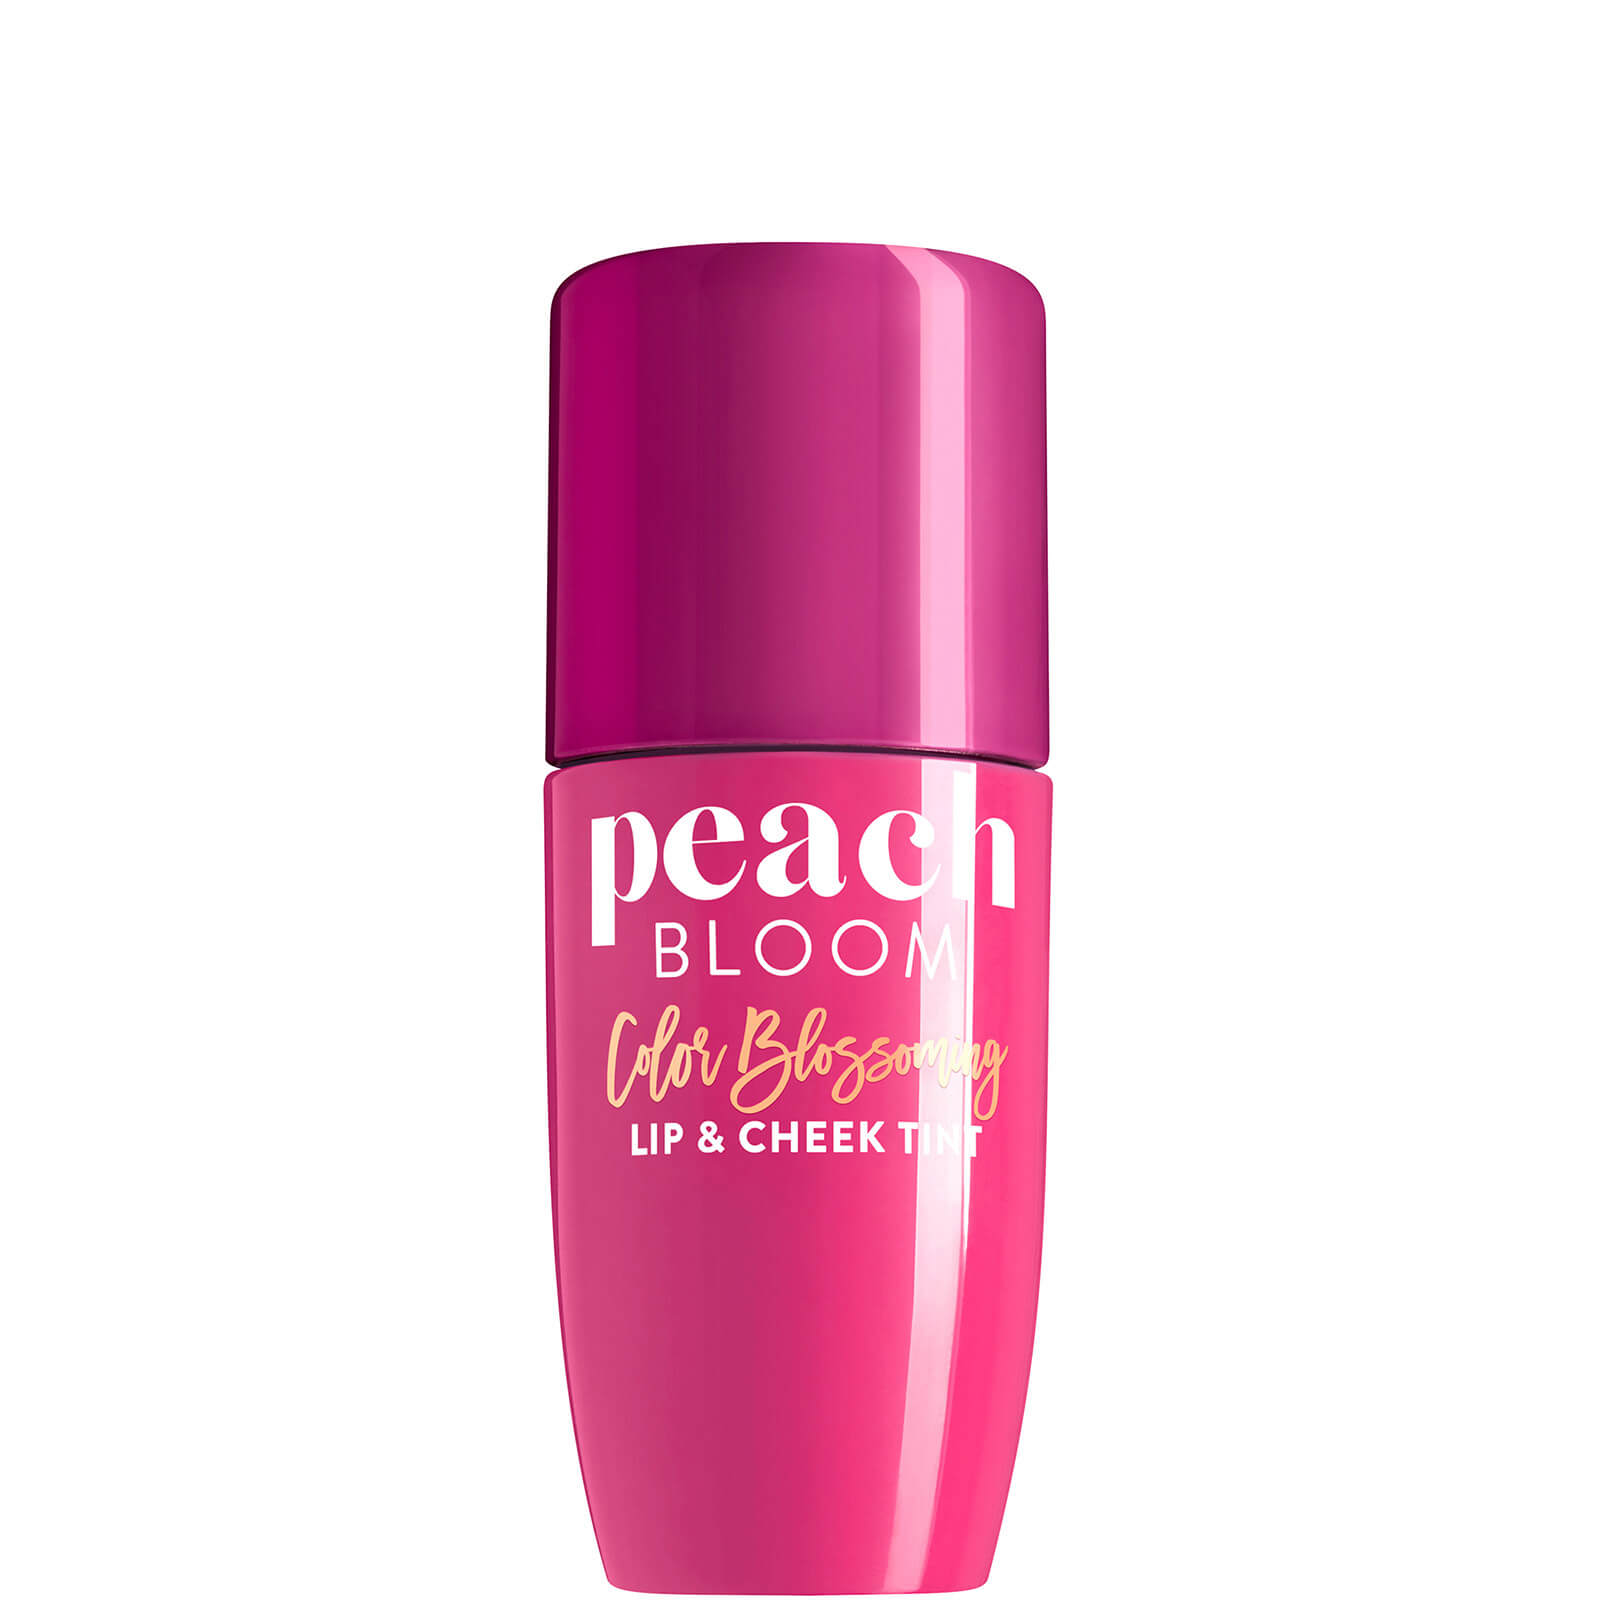 Too Faced Peach Bloom Colour Blossoming Lip and Cheek Tint (Various Shades) - Guava Glow